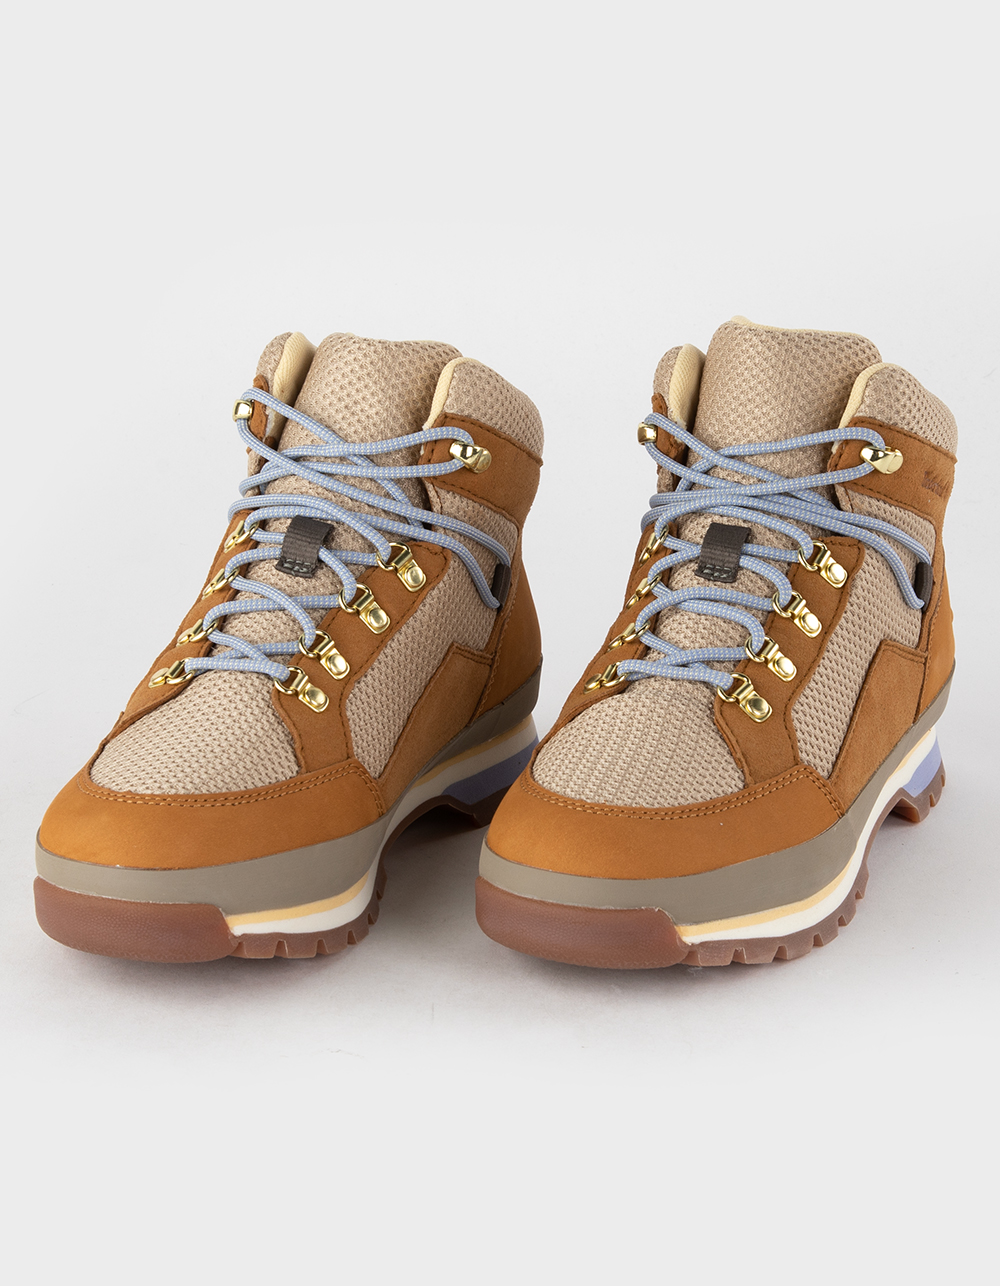 Guau lunes Insignia TIMBERLAND Euro Hiker Womens Hiking Boots - WHEAT | Tillys